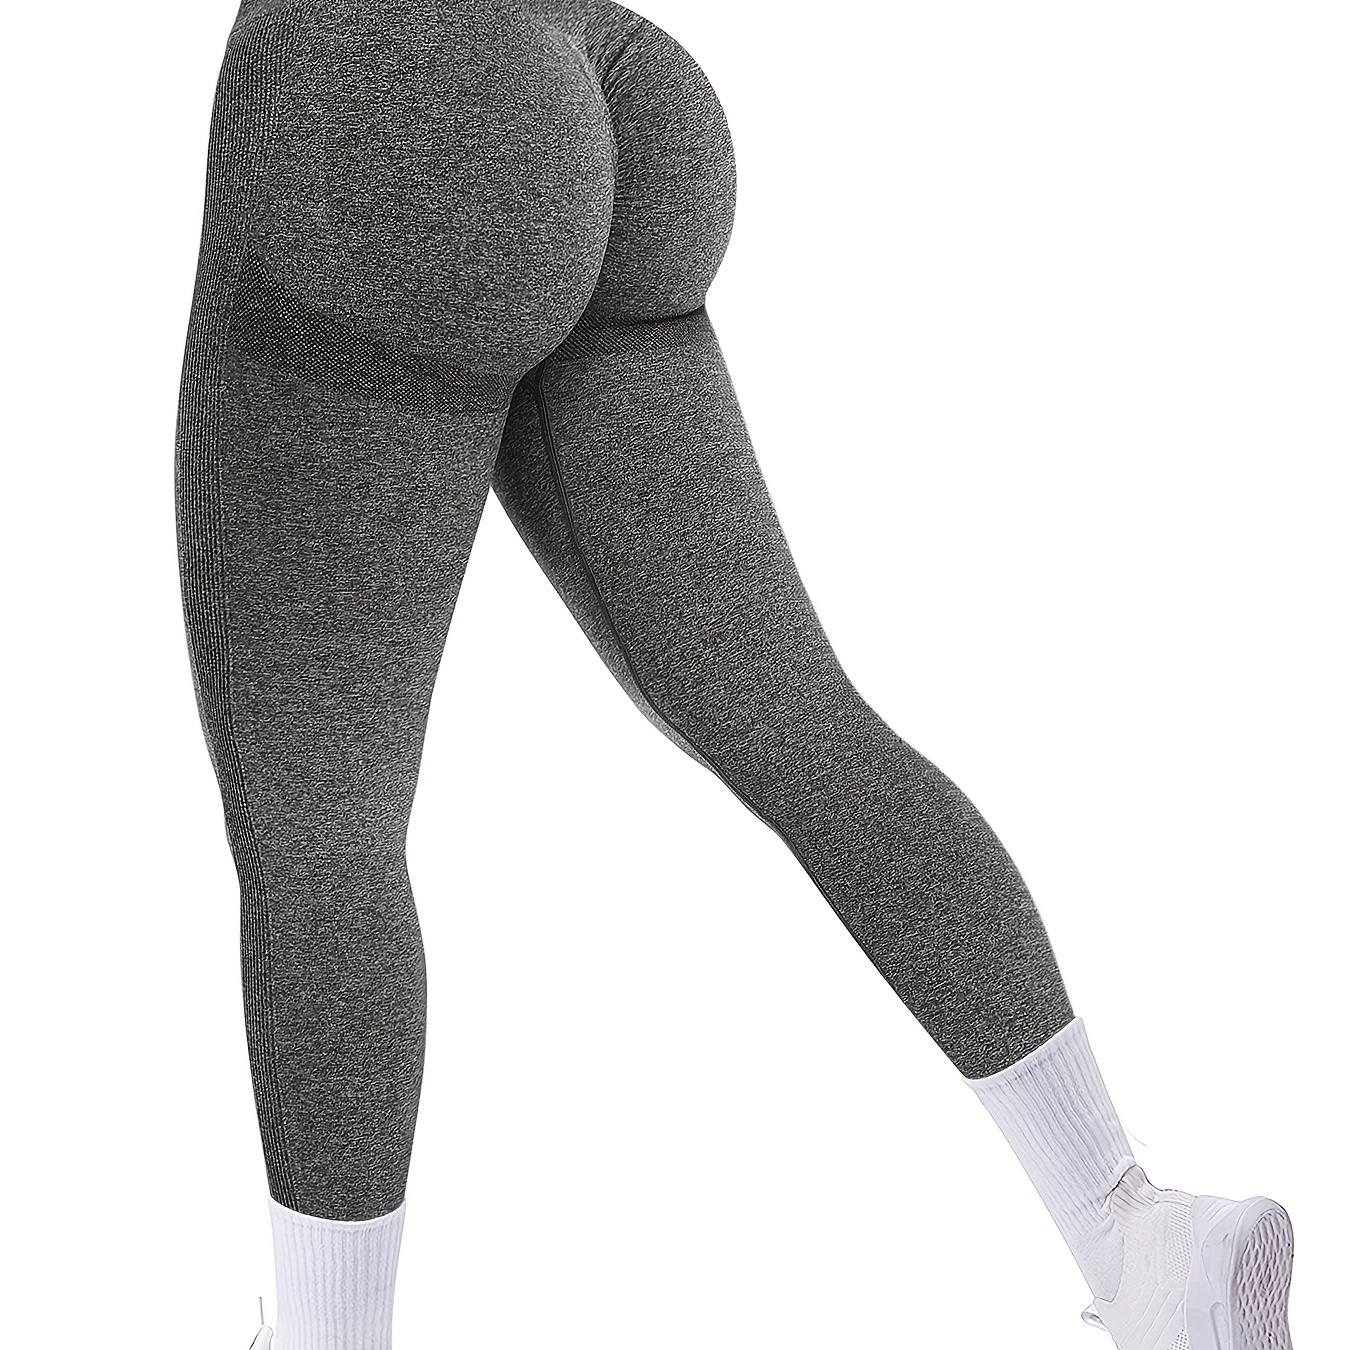  Yoga Pants Tall Women Leggings for Women Butt Lift High Waisted  Tummy Control No See-Through Yoga Pants Workout Running Gym Scrunch  Compression Booty Tights Deep Grey : Sports & Outdoors